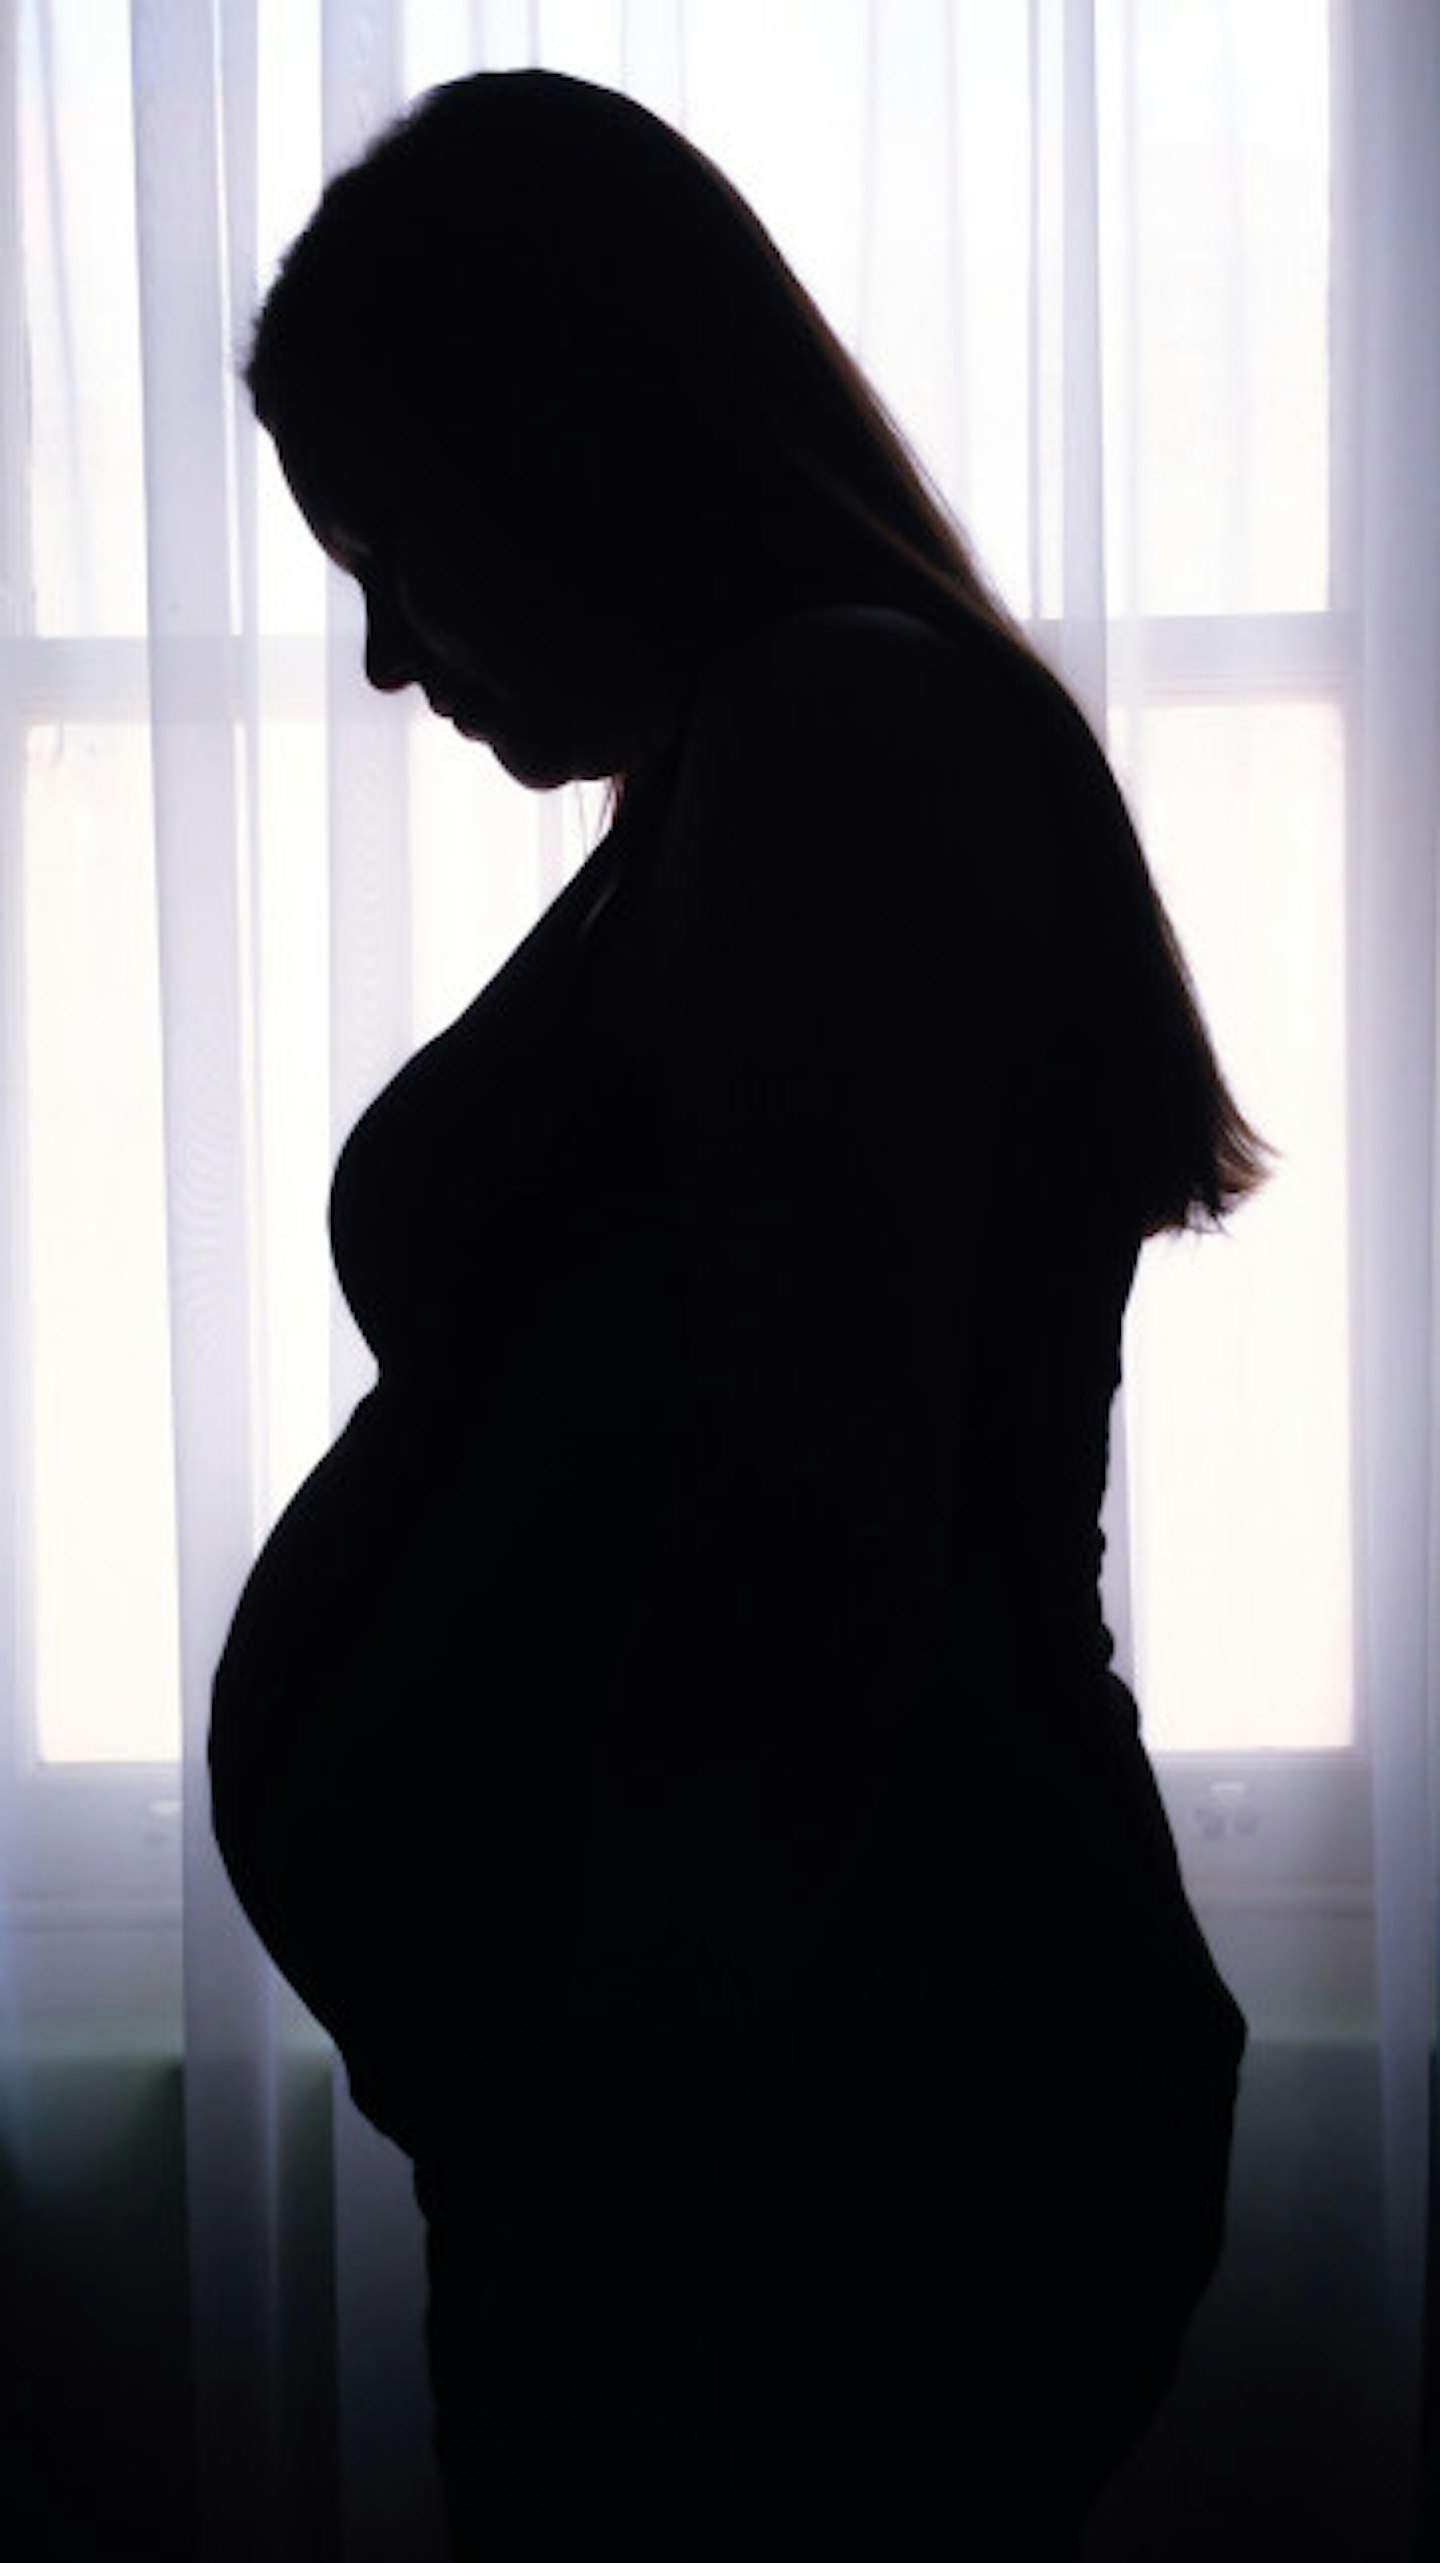 The pregnant woman was in 'obvious distress' (stock image)